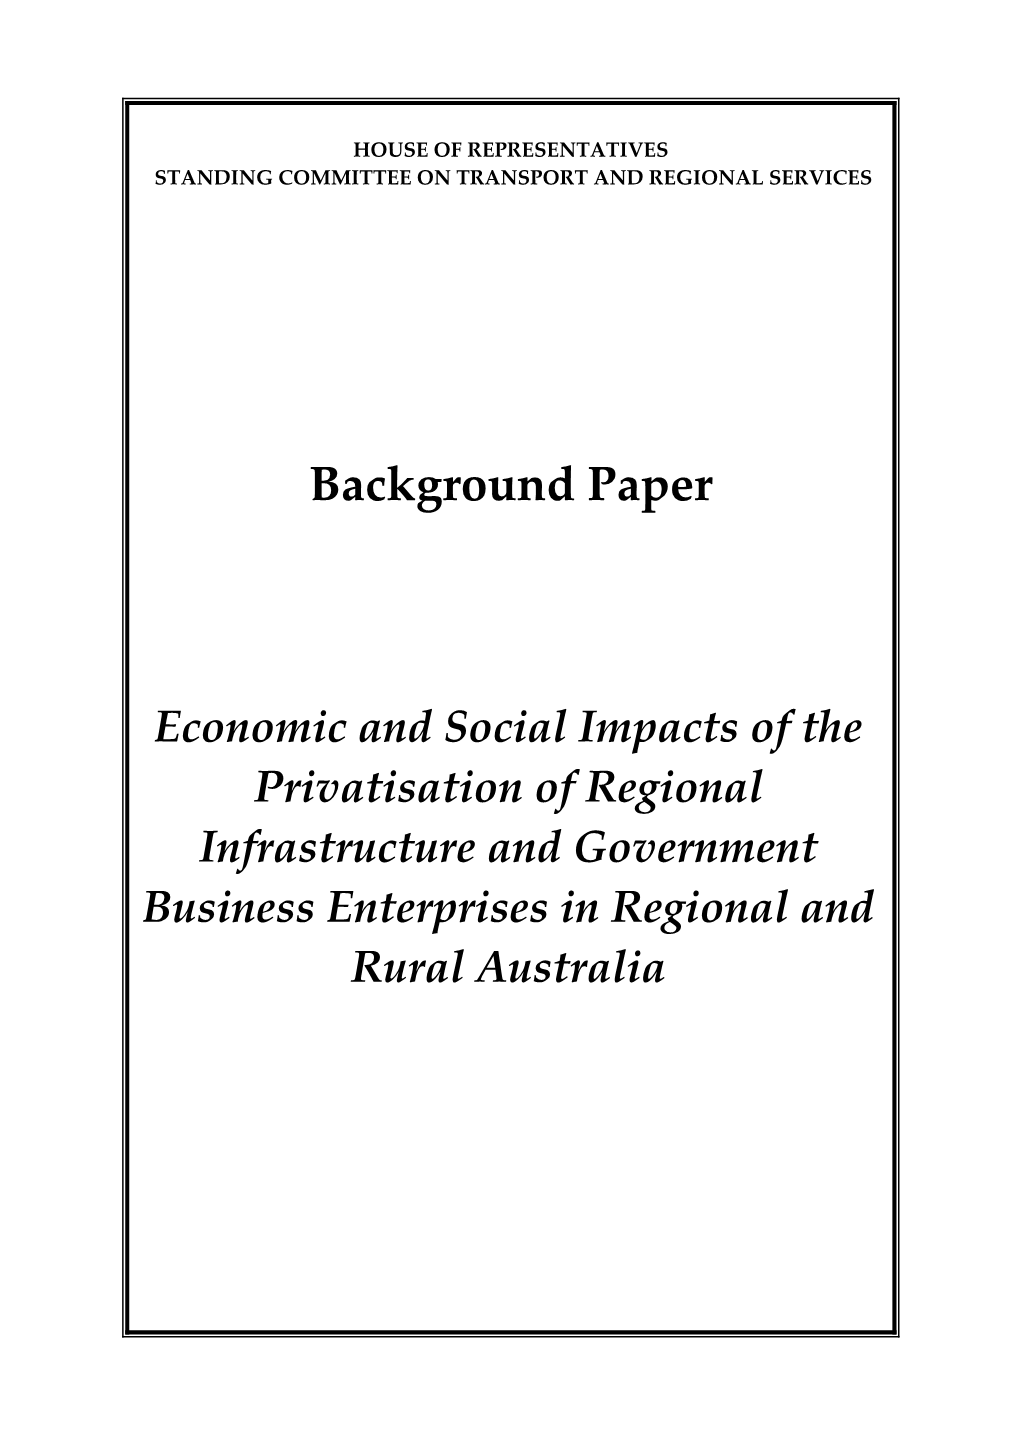 Economic and Social Impact of Privatisation of Infrastructure and Gbes in Regional And